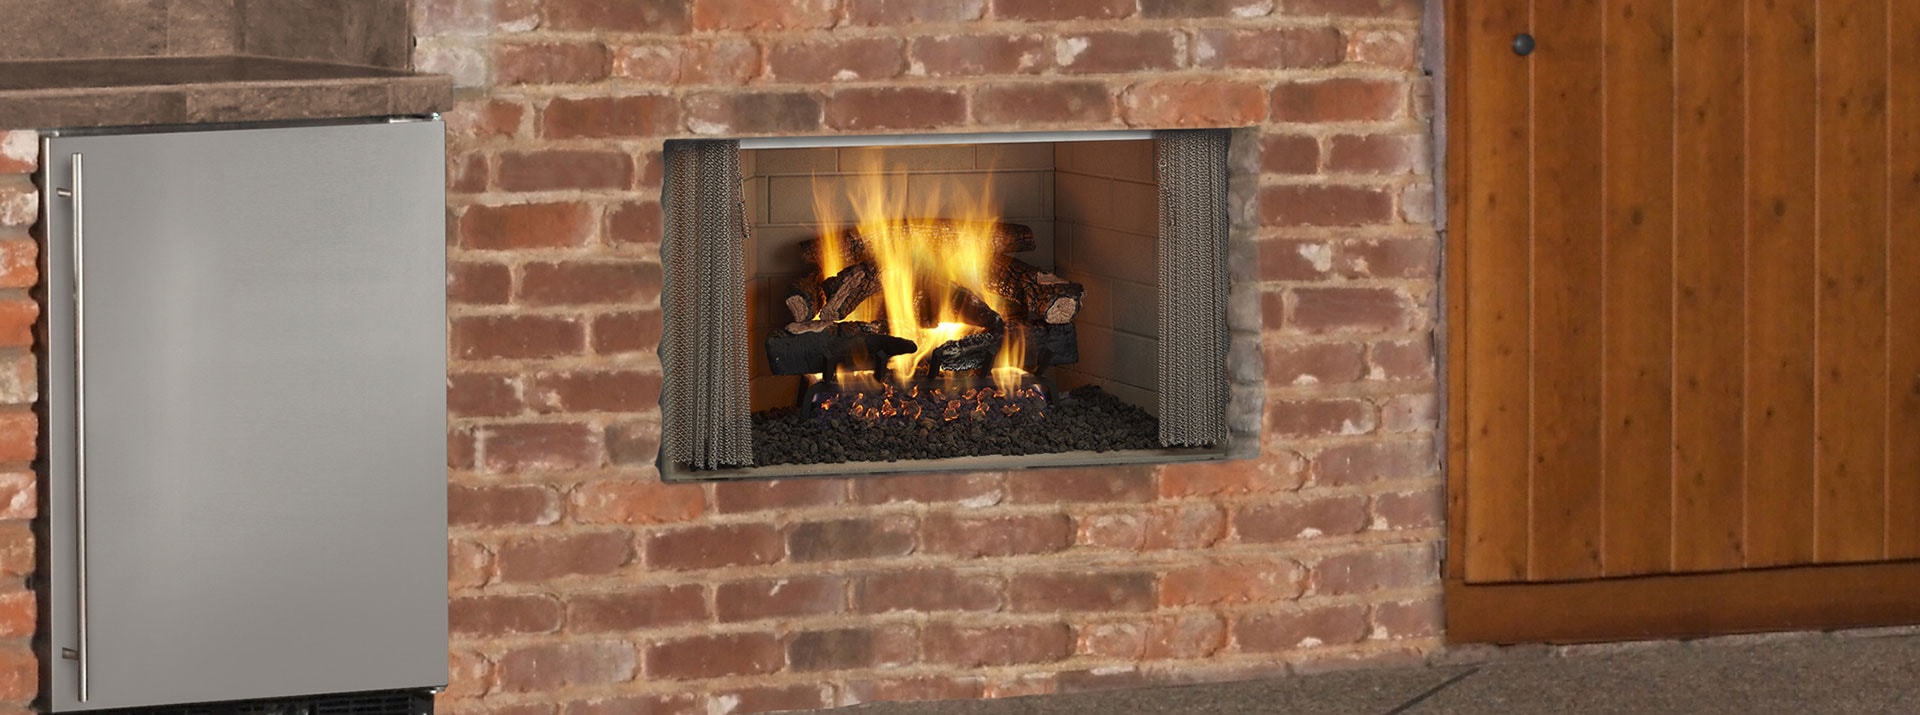 Gas Fireplace Insert Ideas Lovely Villawood Wood Burning Outdoor Fireplace